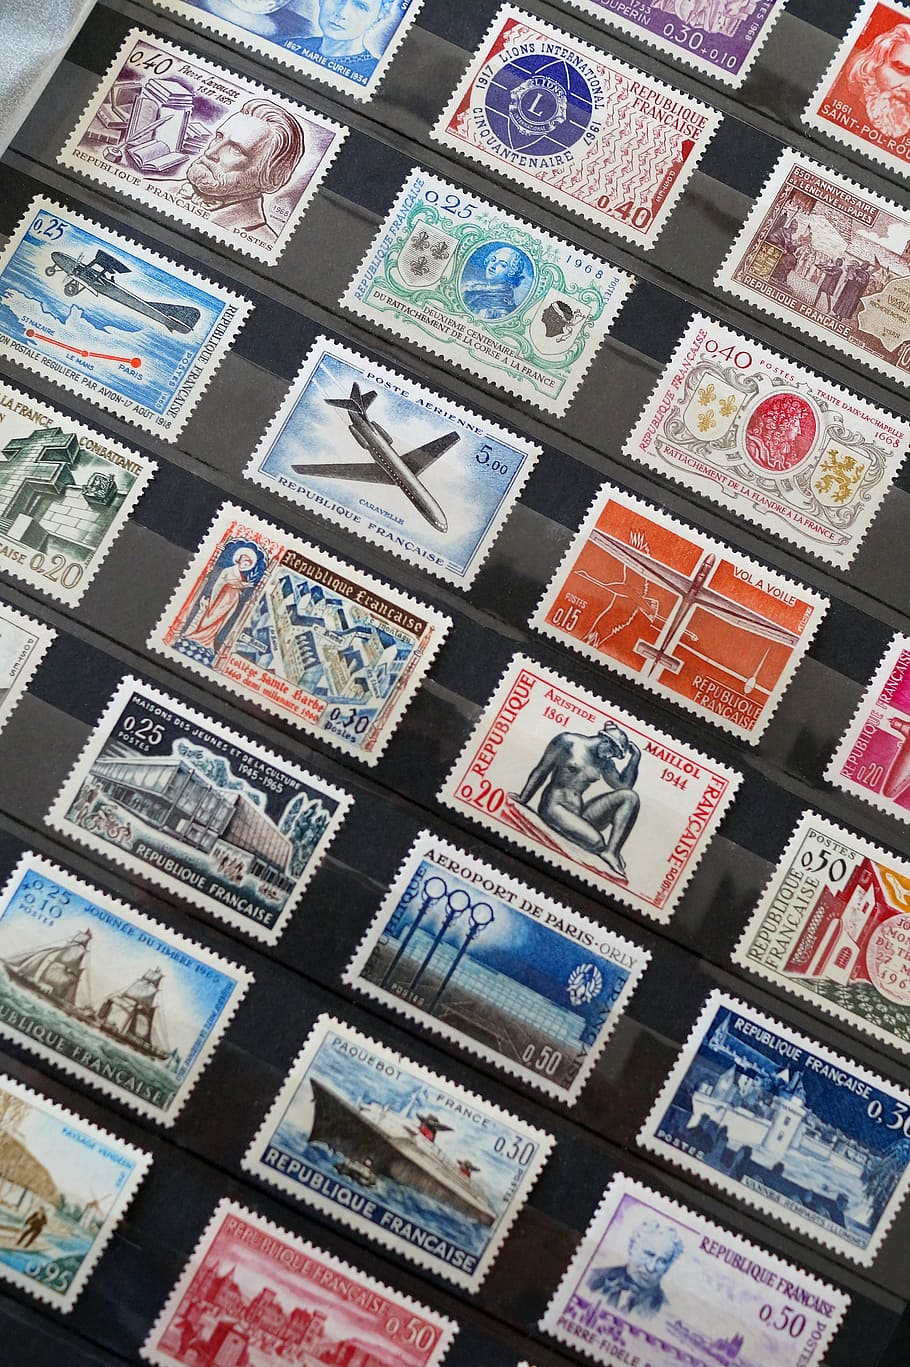 postage collection, stamps, collection, philately, french stamps, stamp collection, post, background, full frame, backgrounds